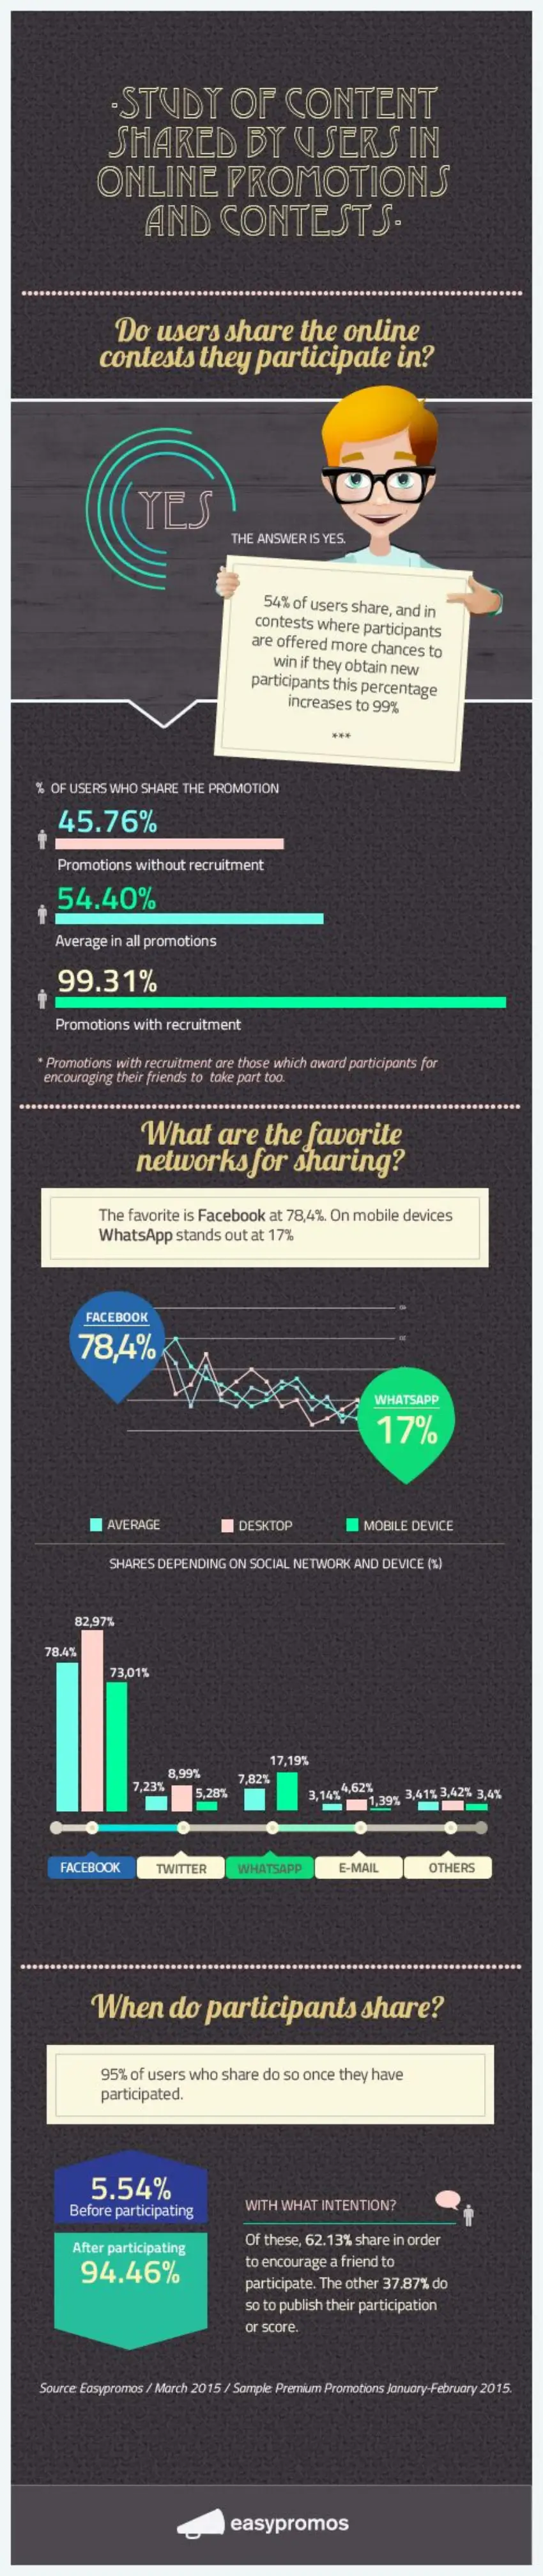 Infographic about how users share online contests they participate in 